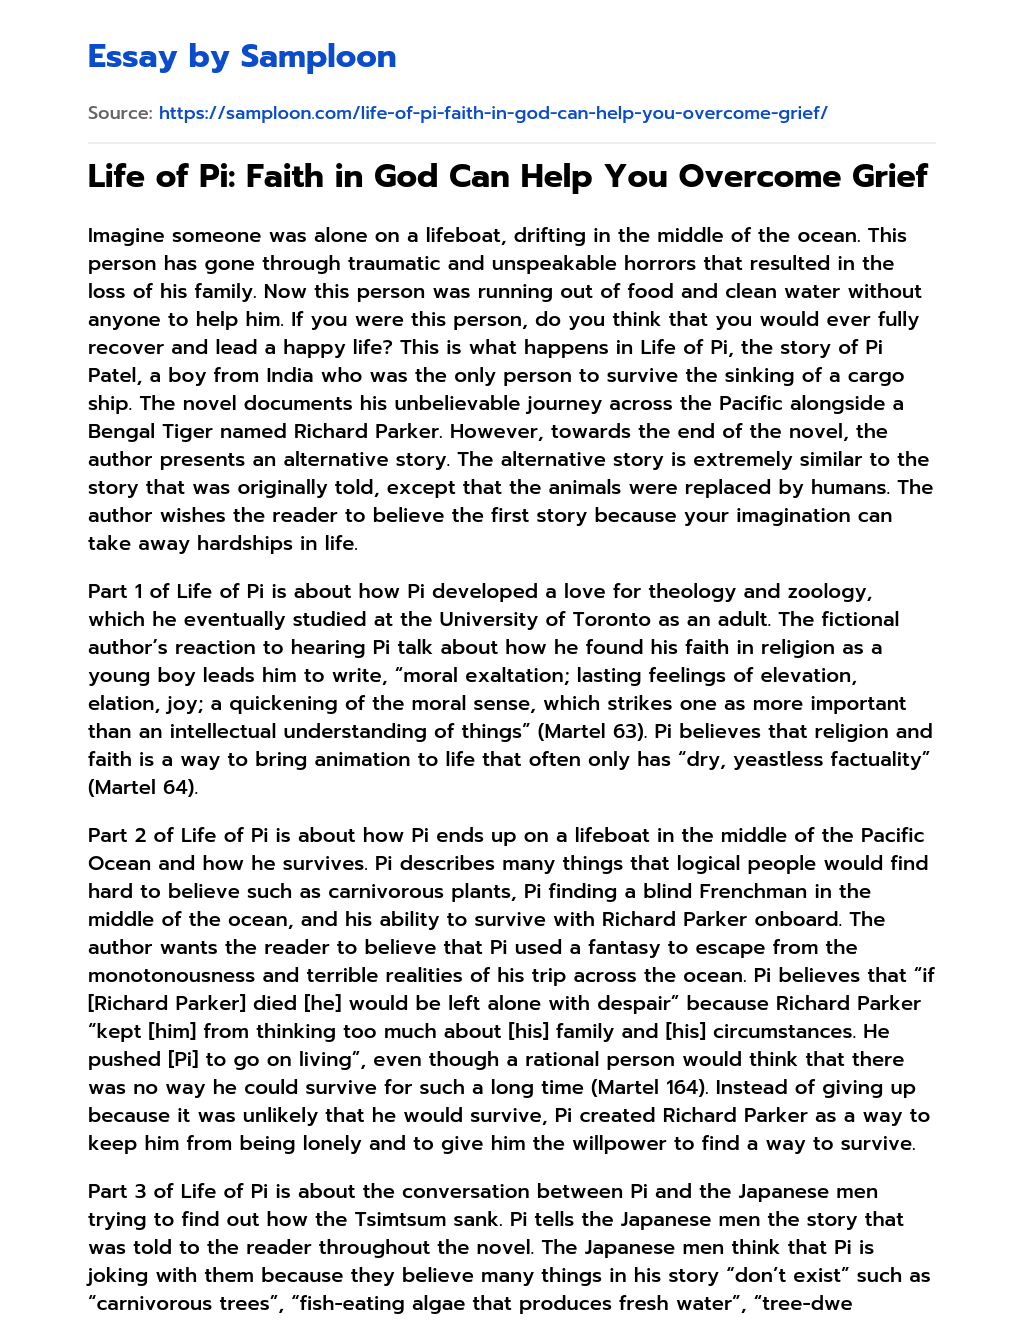 Life of Pi: Faith in God Can Help You Overcome Grief Book Review essay